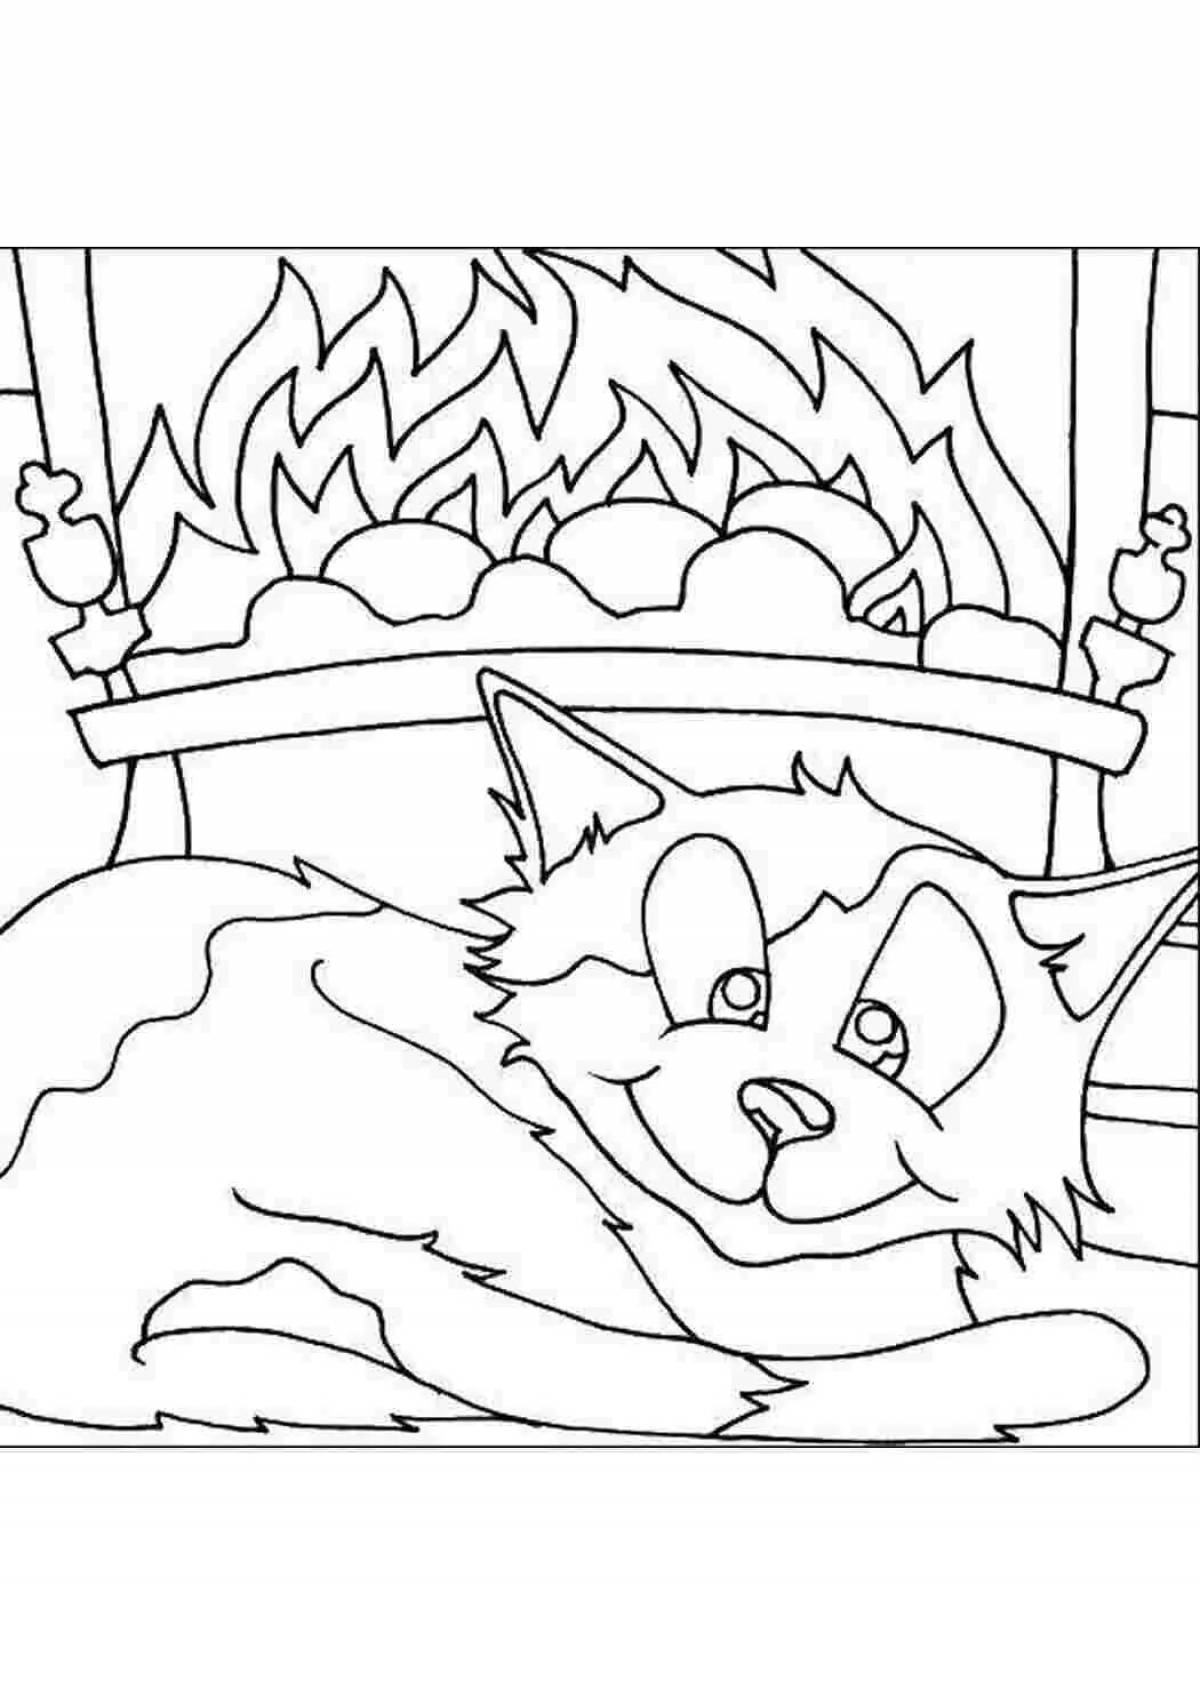 Brightly colored fire enemy coloring page